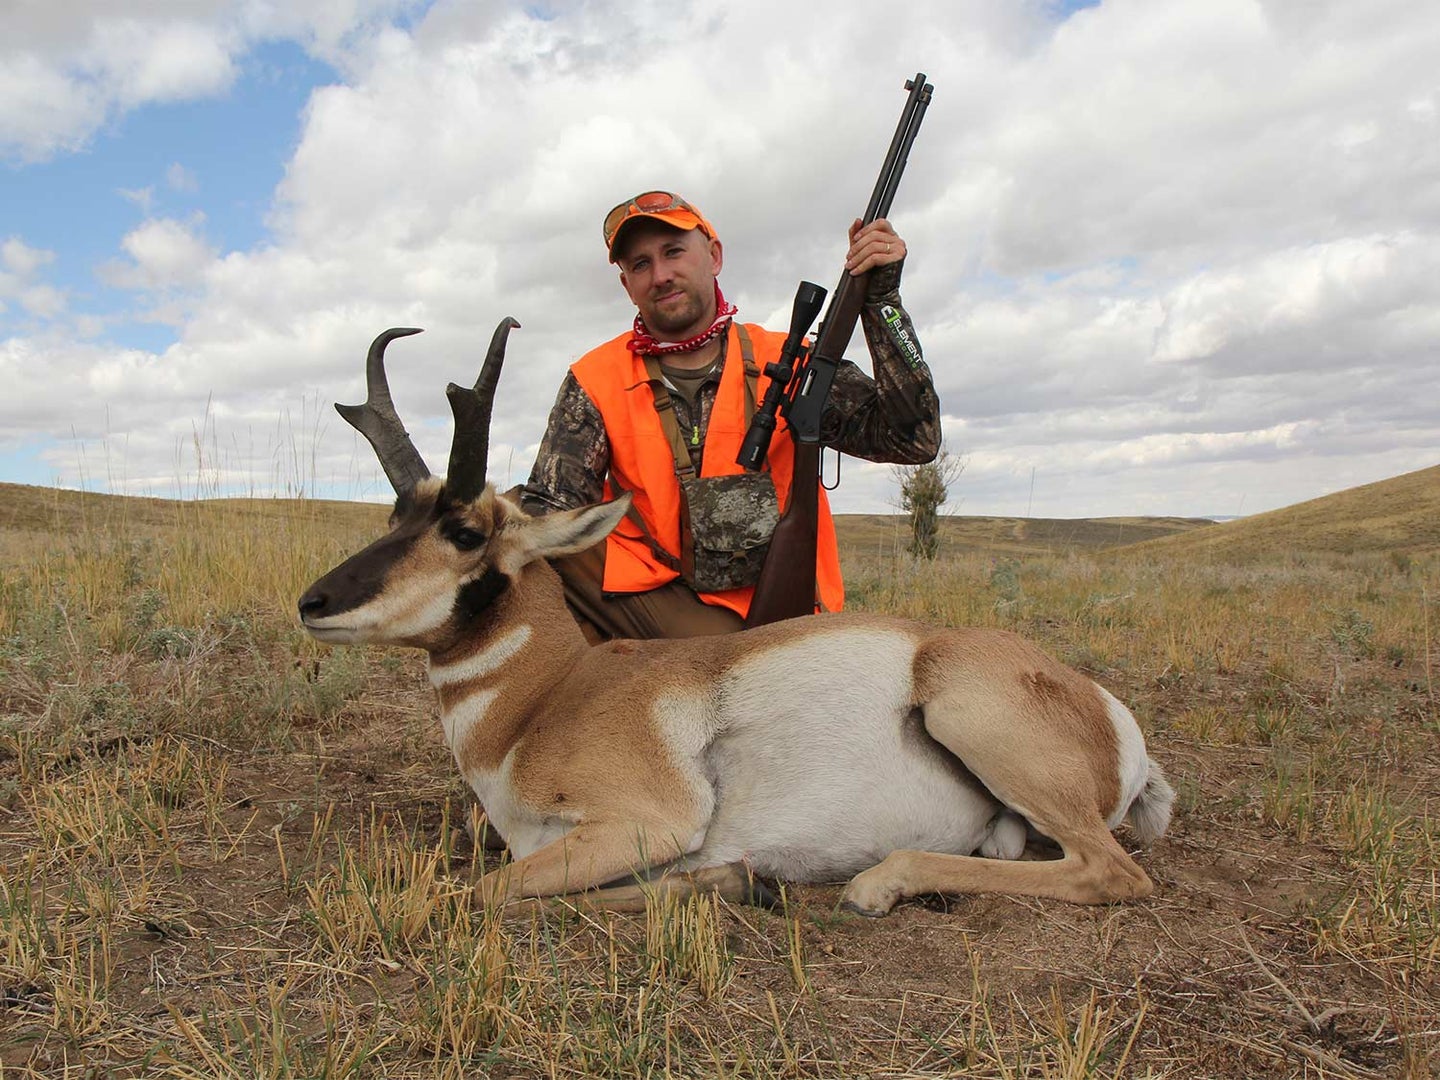 A hunter kneels behind a large antelope in an open field.